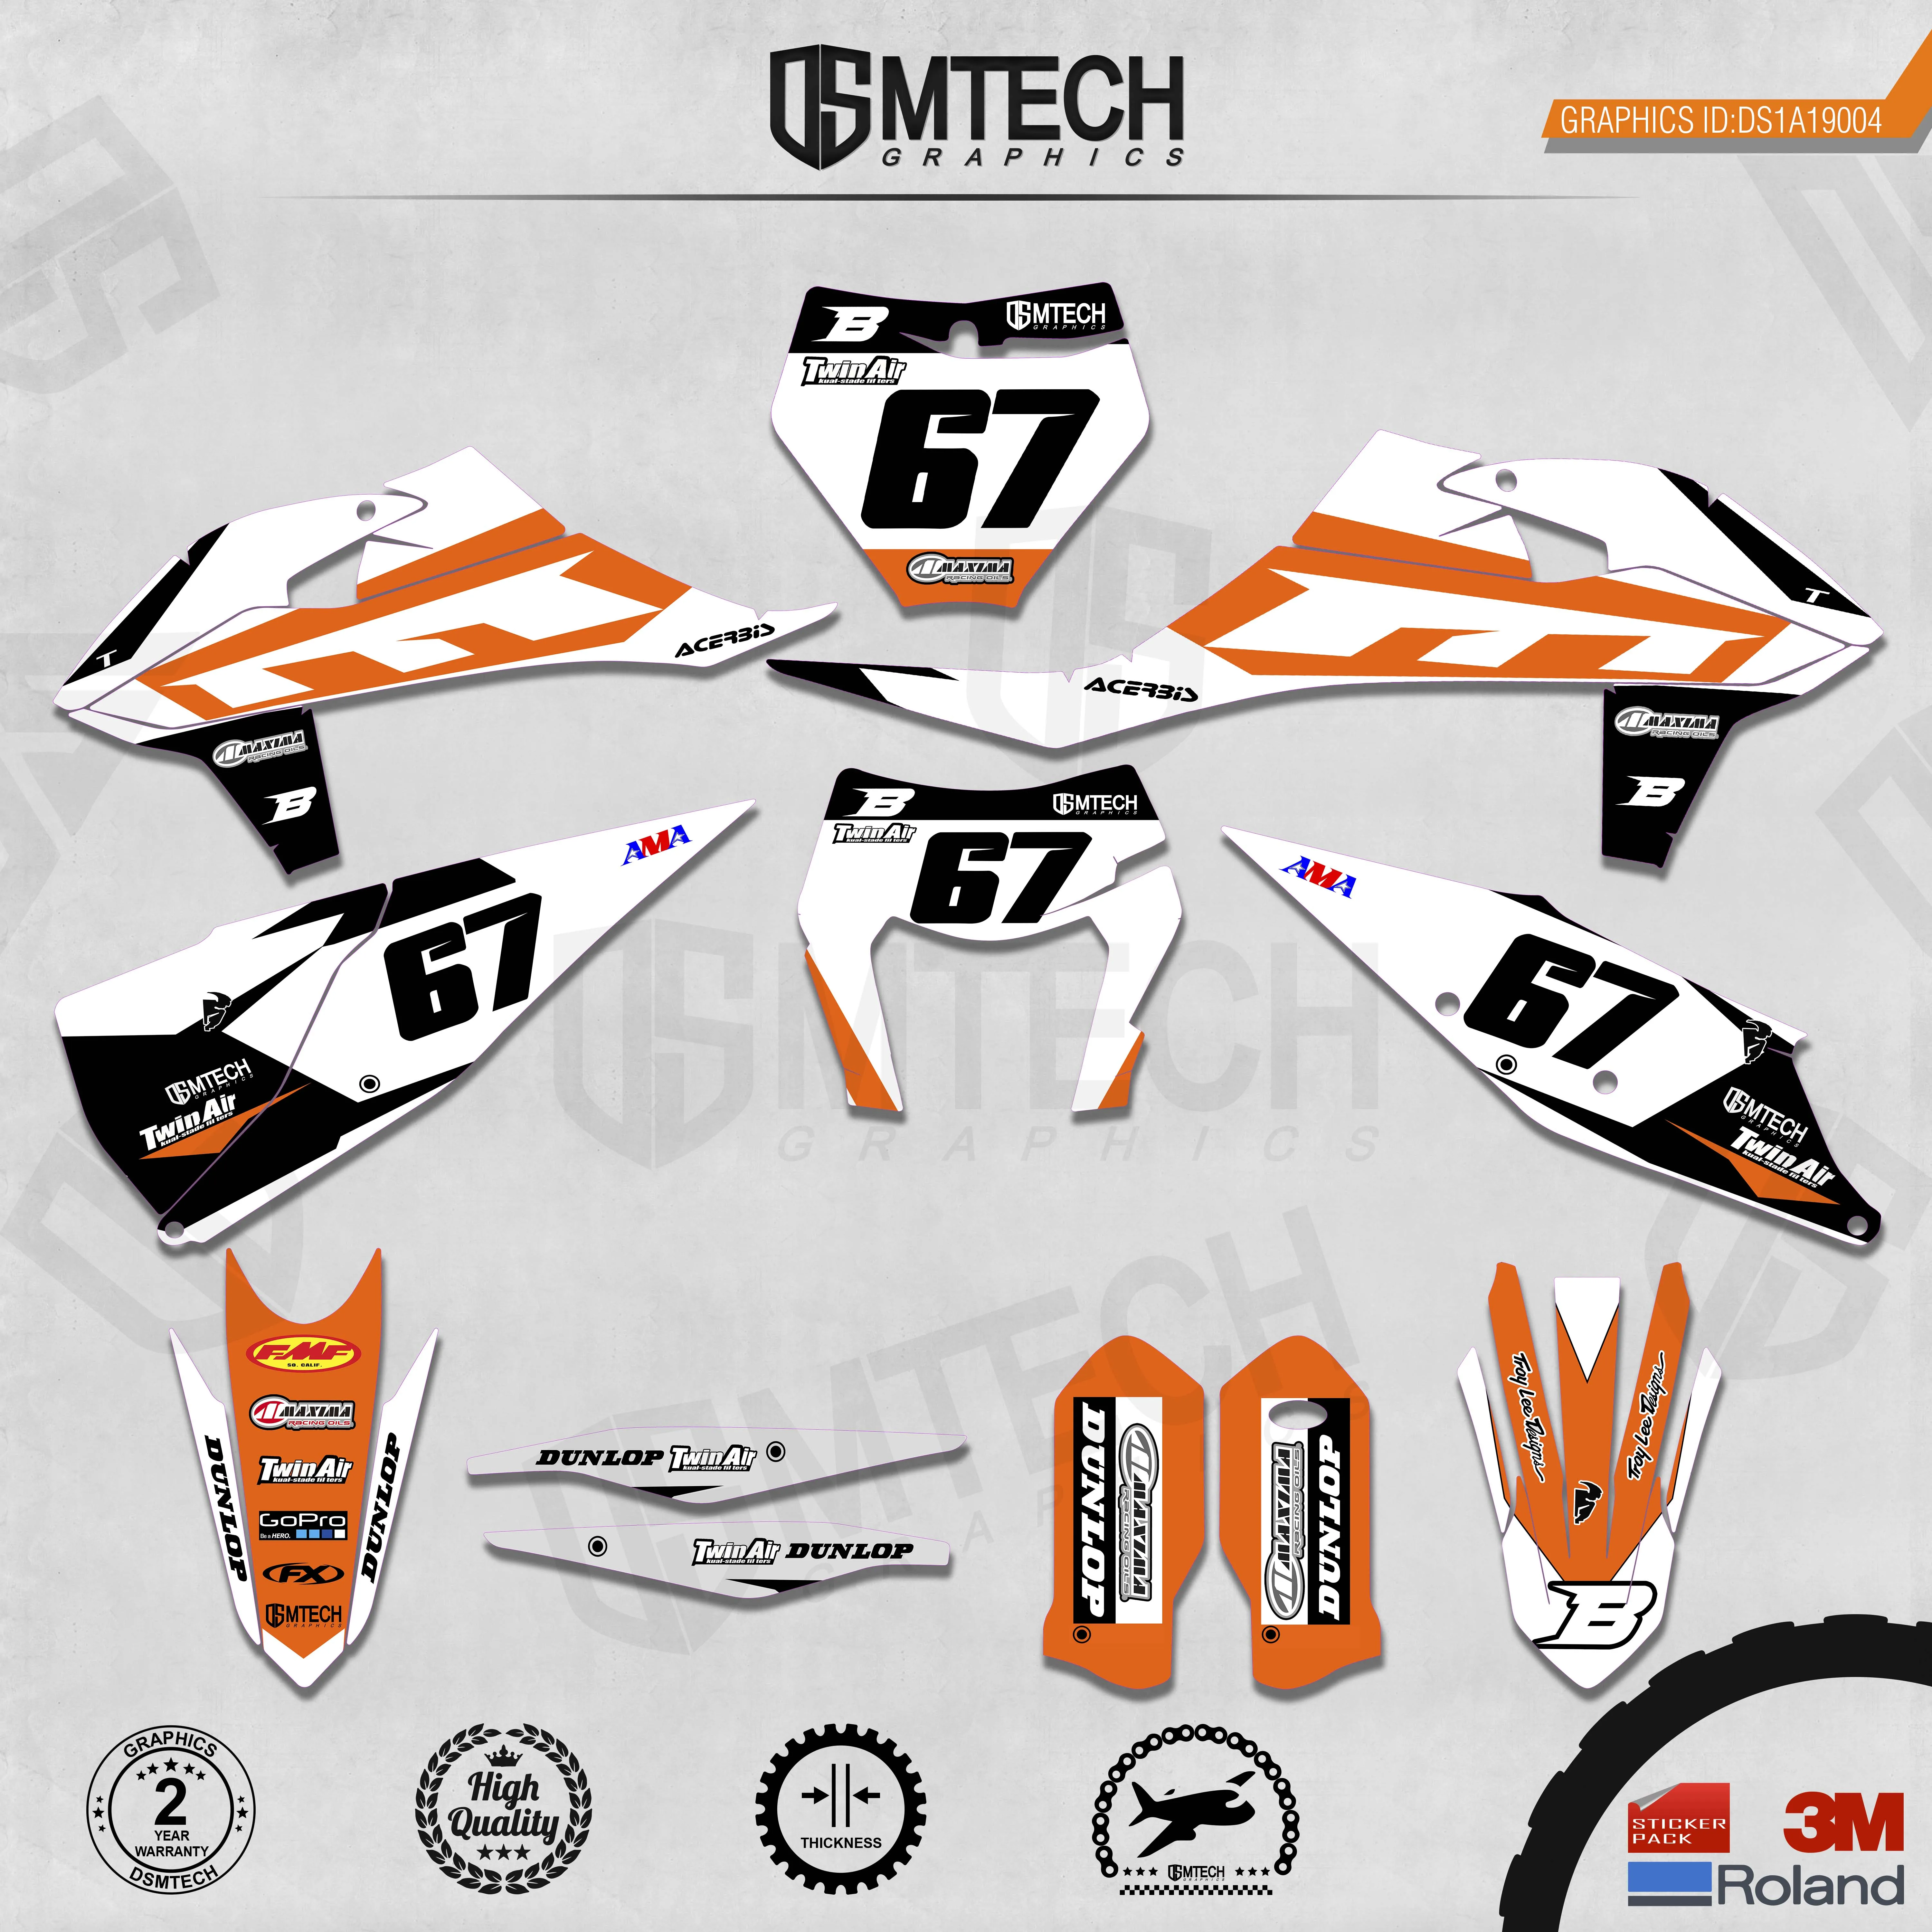 DSMTECH Customized Team Graphics Backgrounds Decals 3M Custom Stickers For 2019-2020 SXF 2020-2021EXC 004